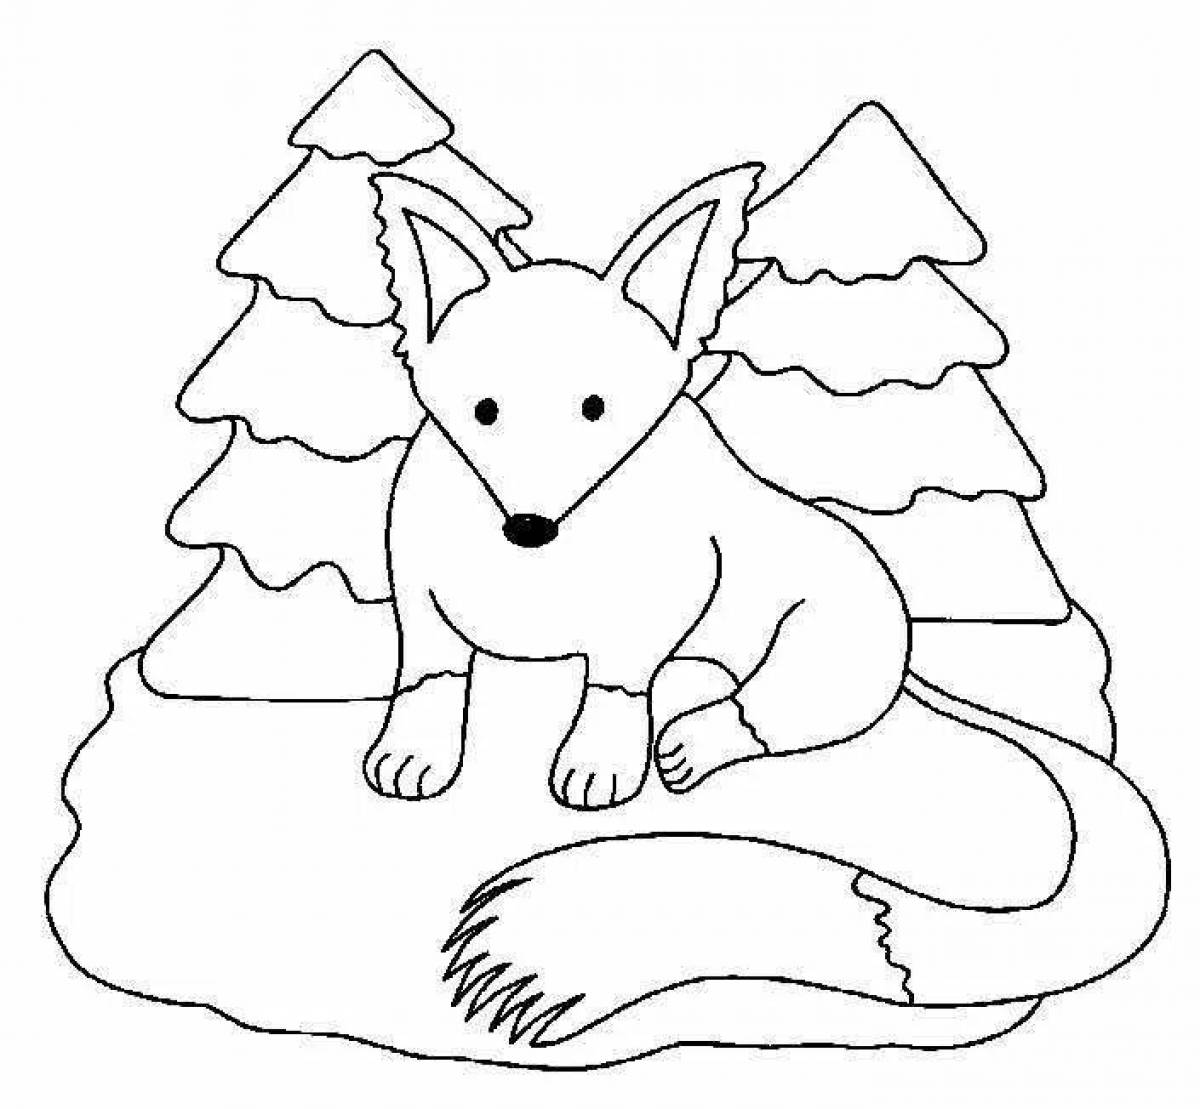 Rampant fox coloring book for 3-4 year olds